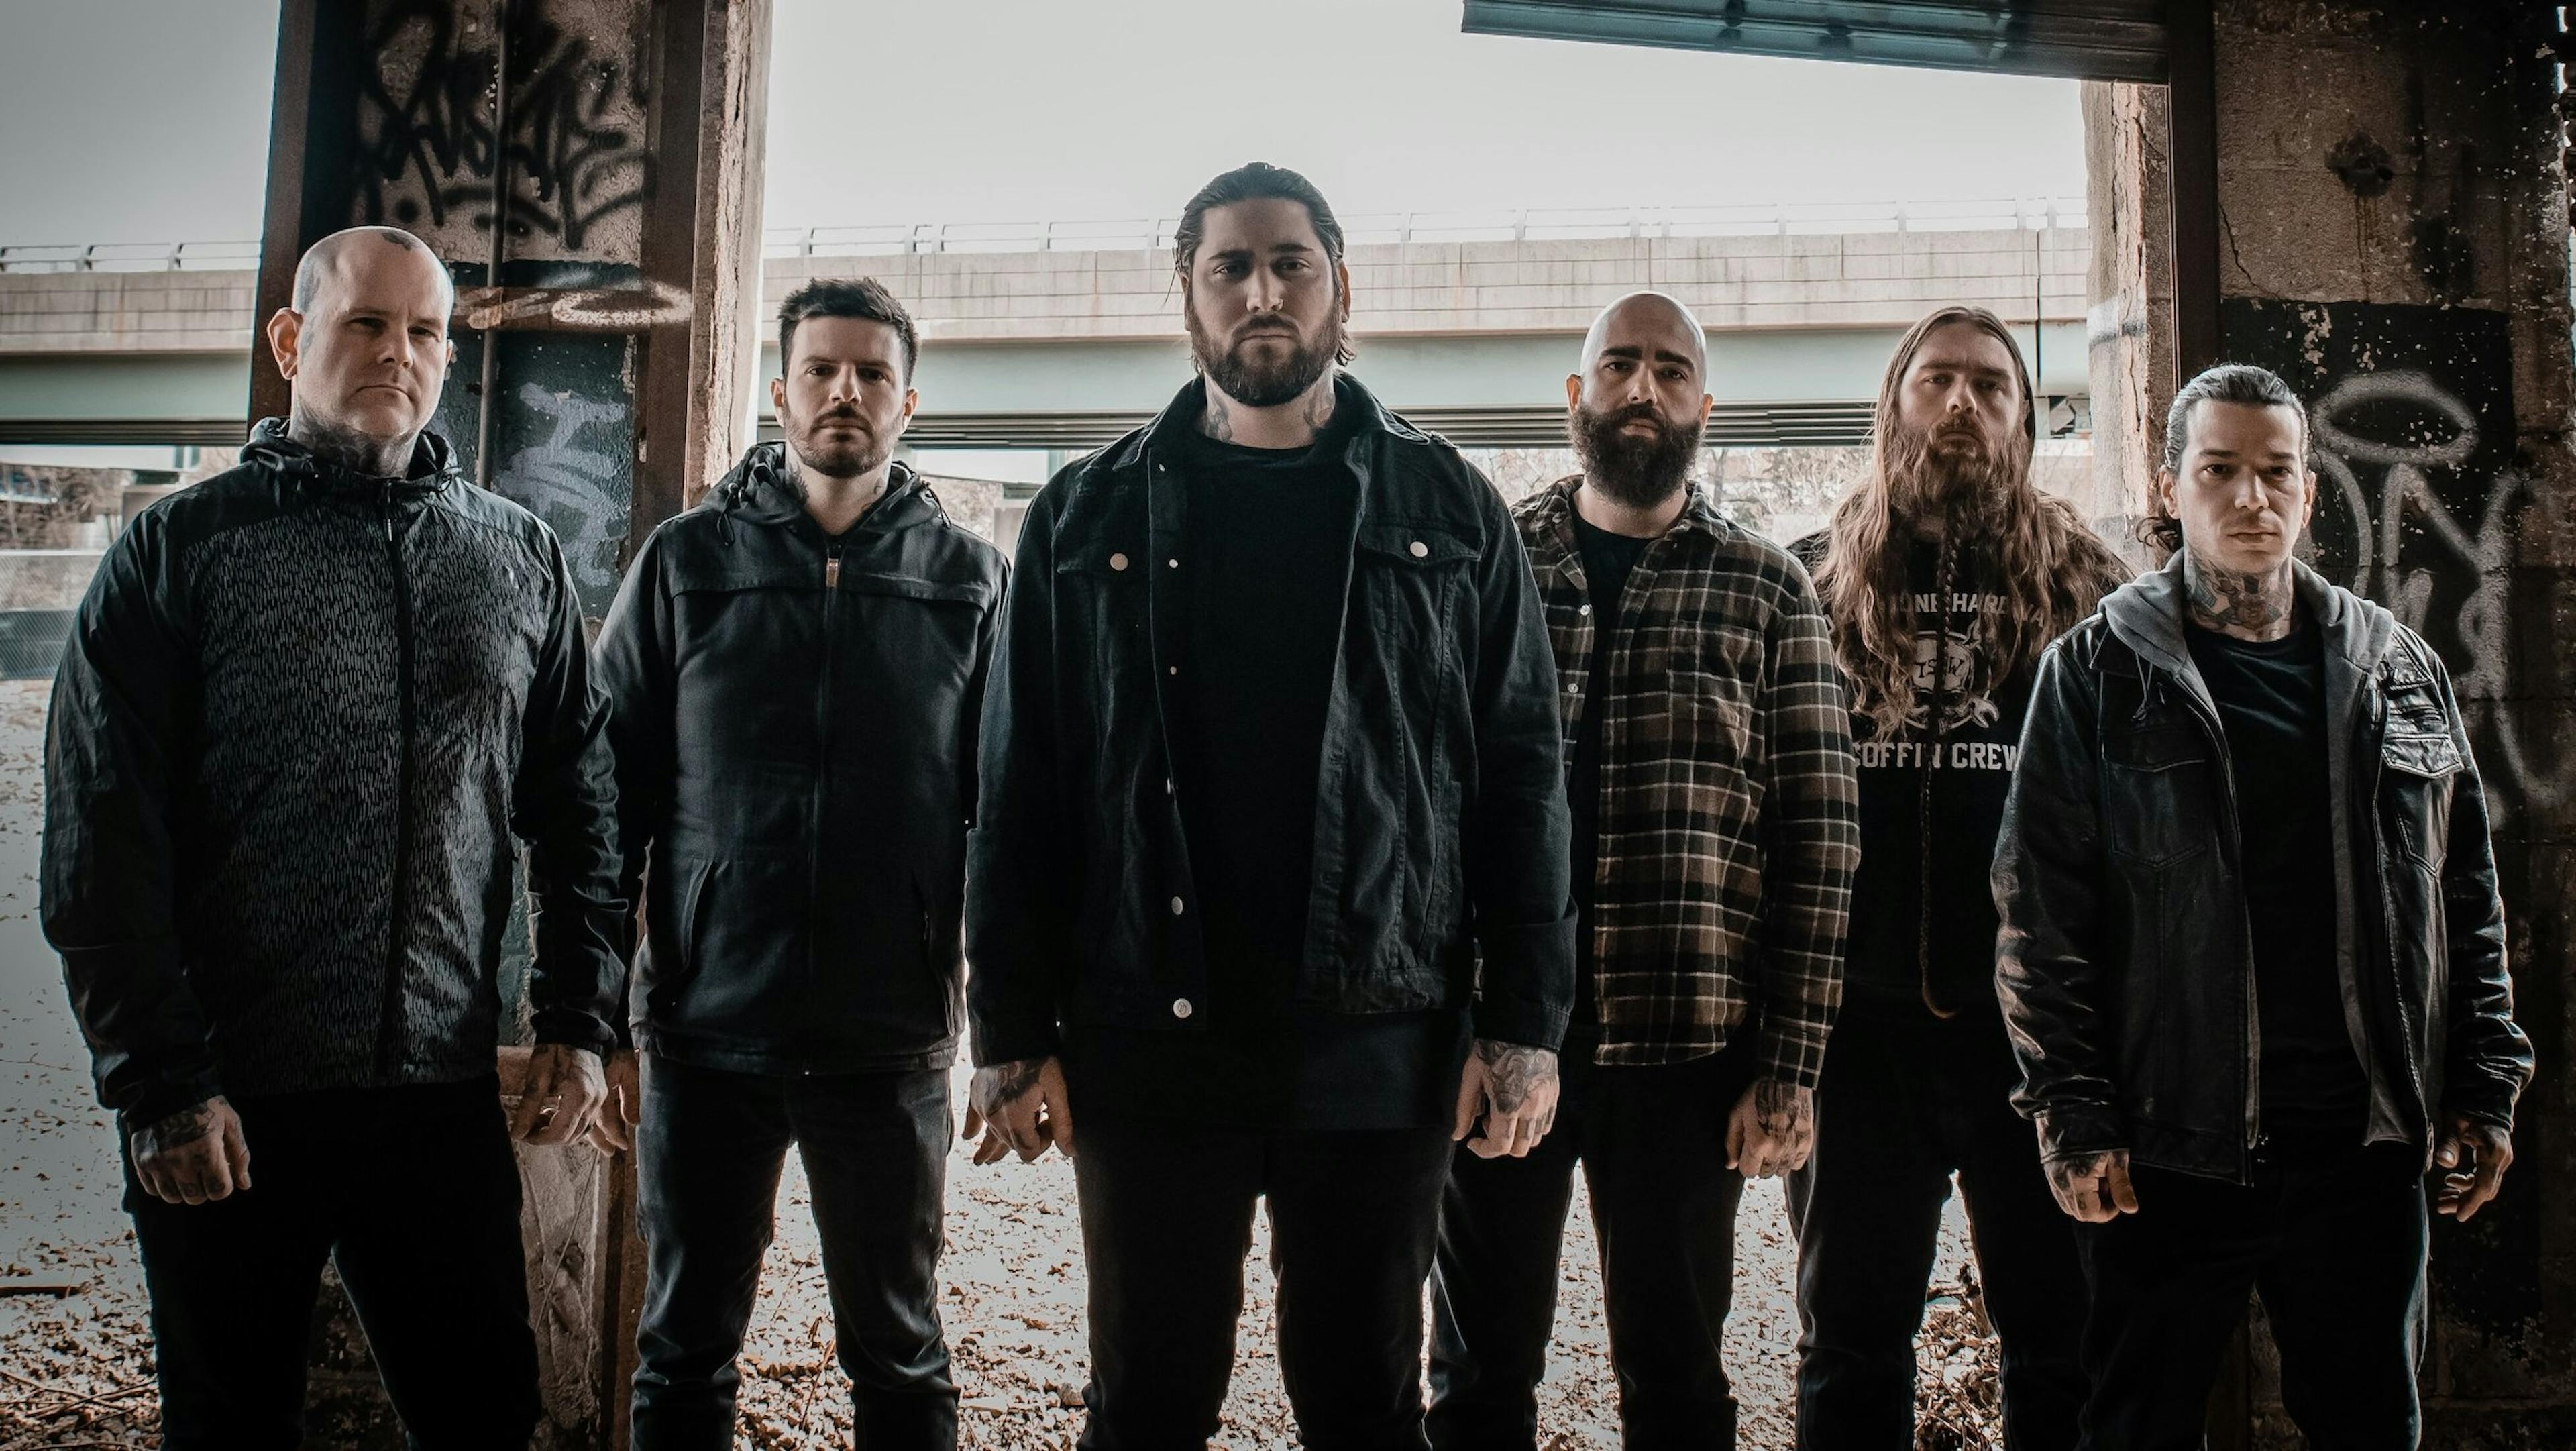 Fit For An Autopsy Raise Over $6000 For Australian Wildlife Charity